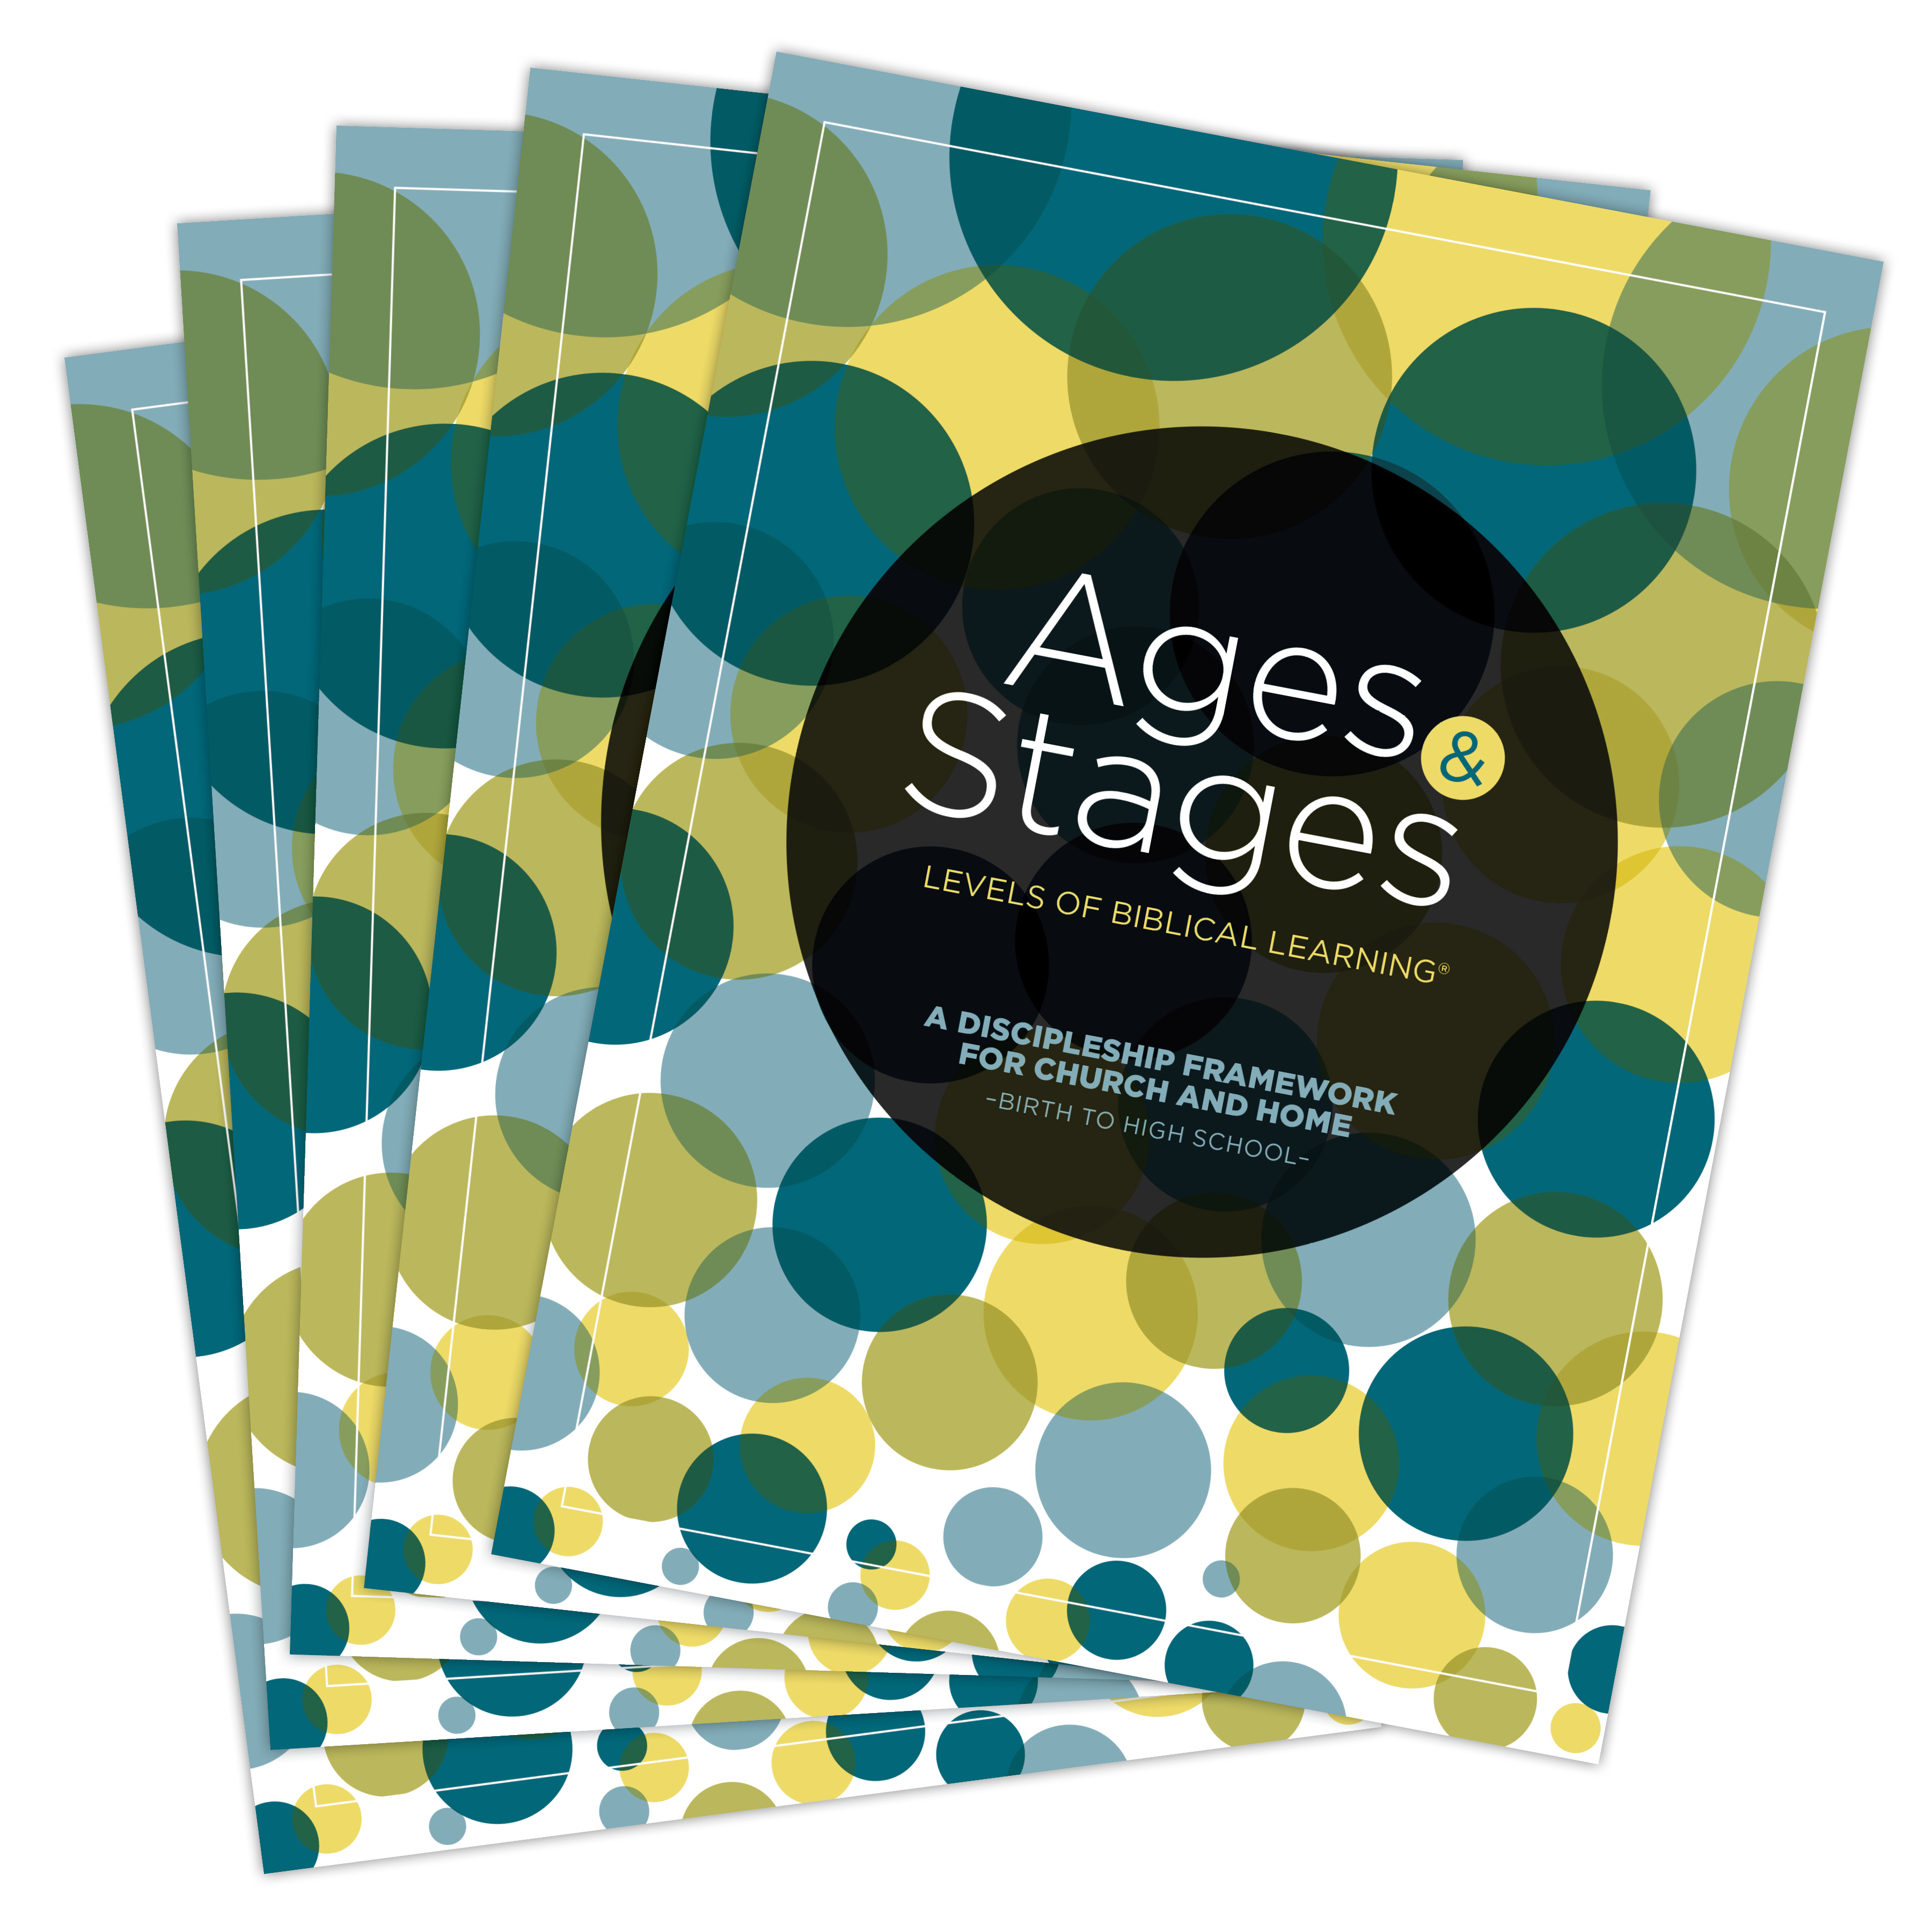 Ages and Stages A Discipleship Framework for Church and Home - Birth